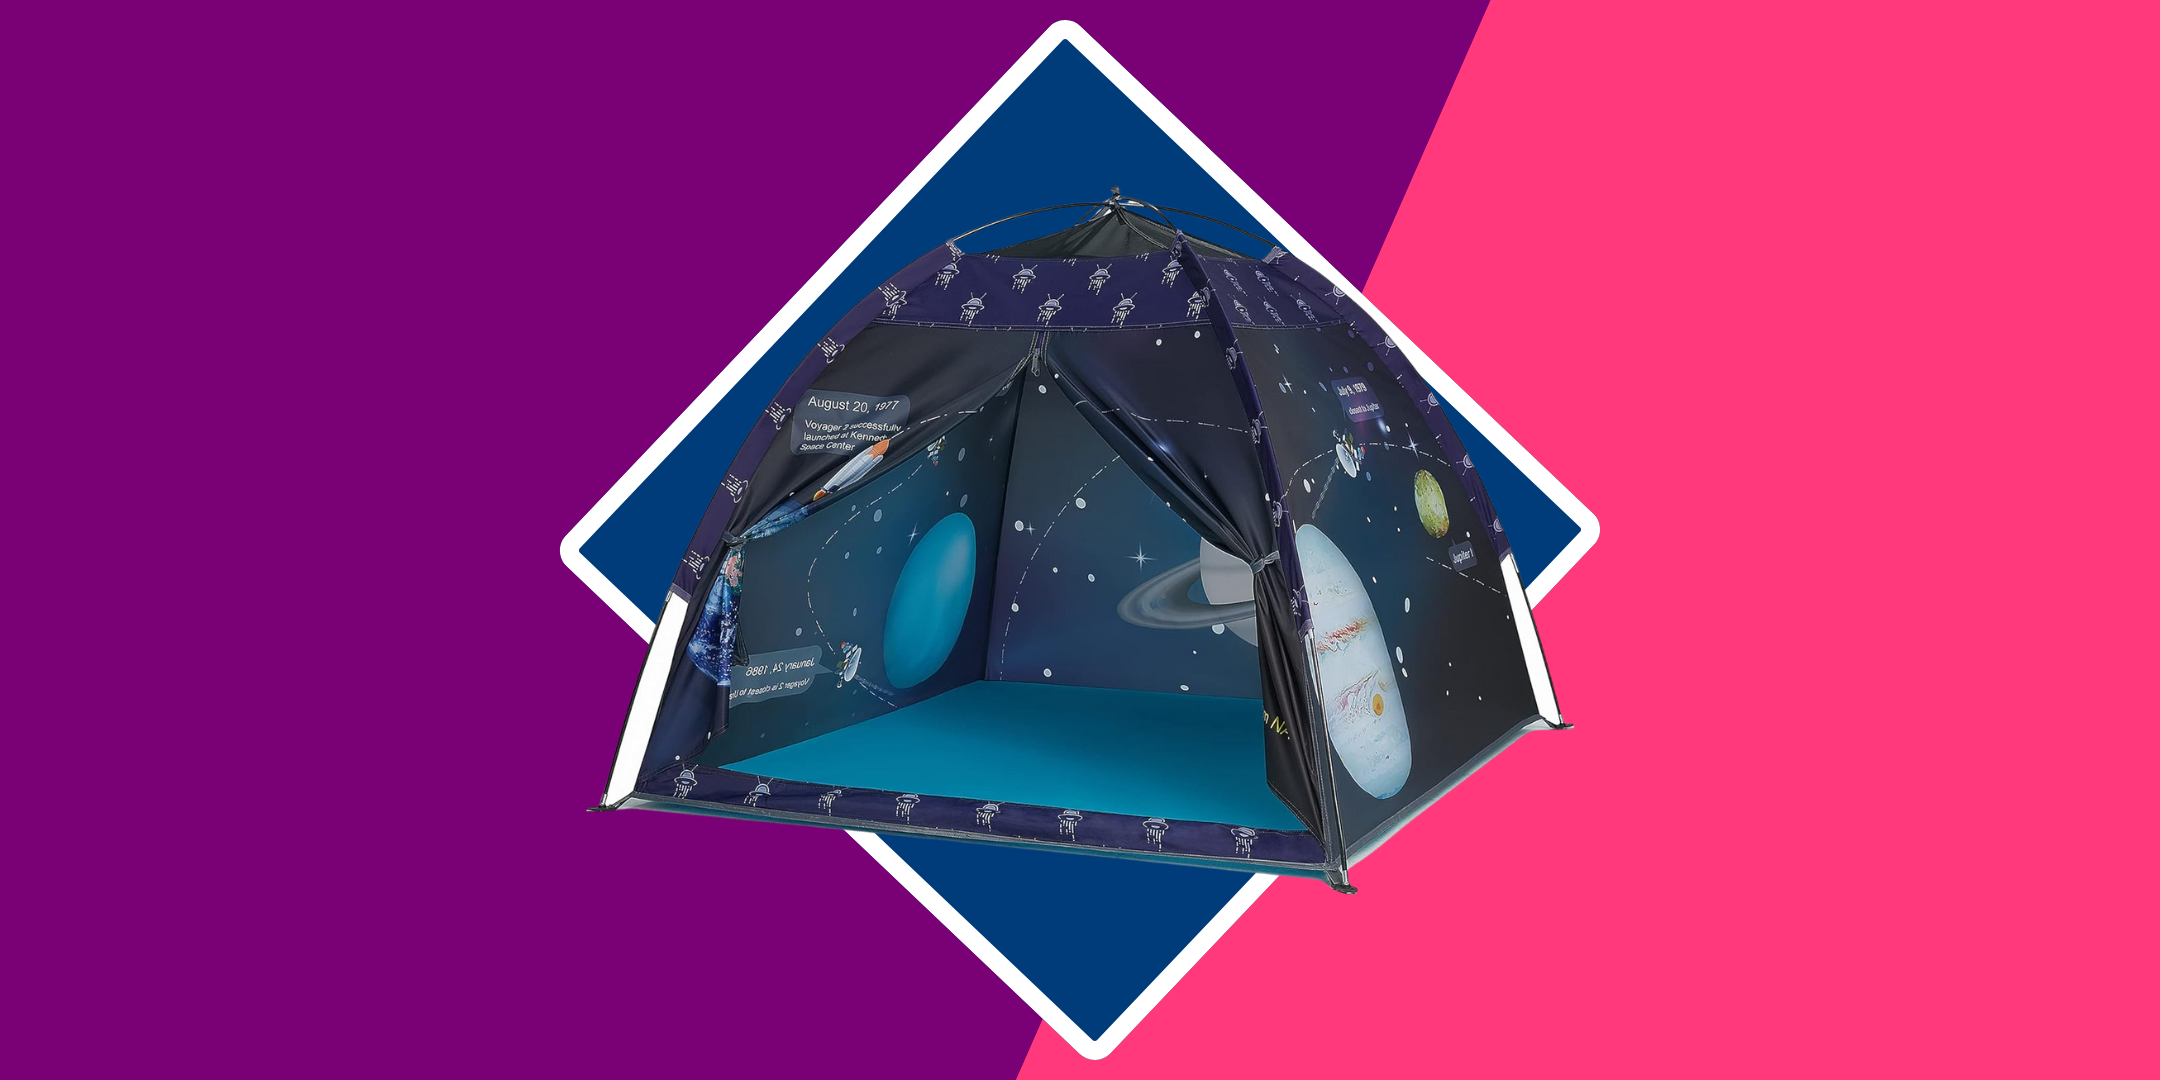 purple and pink background with blue camping tent